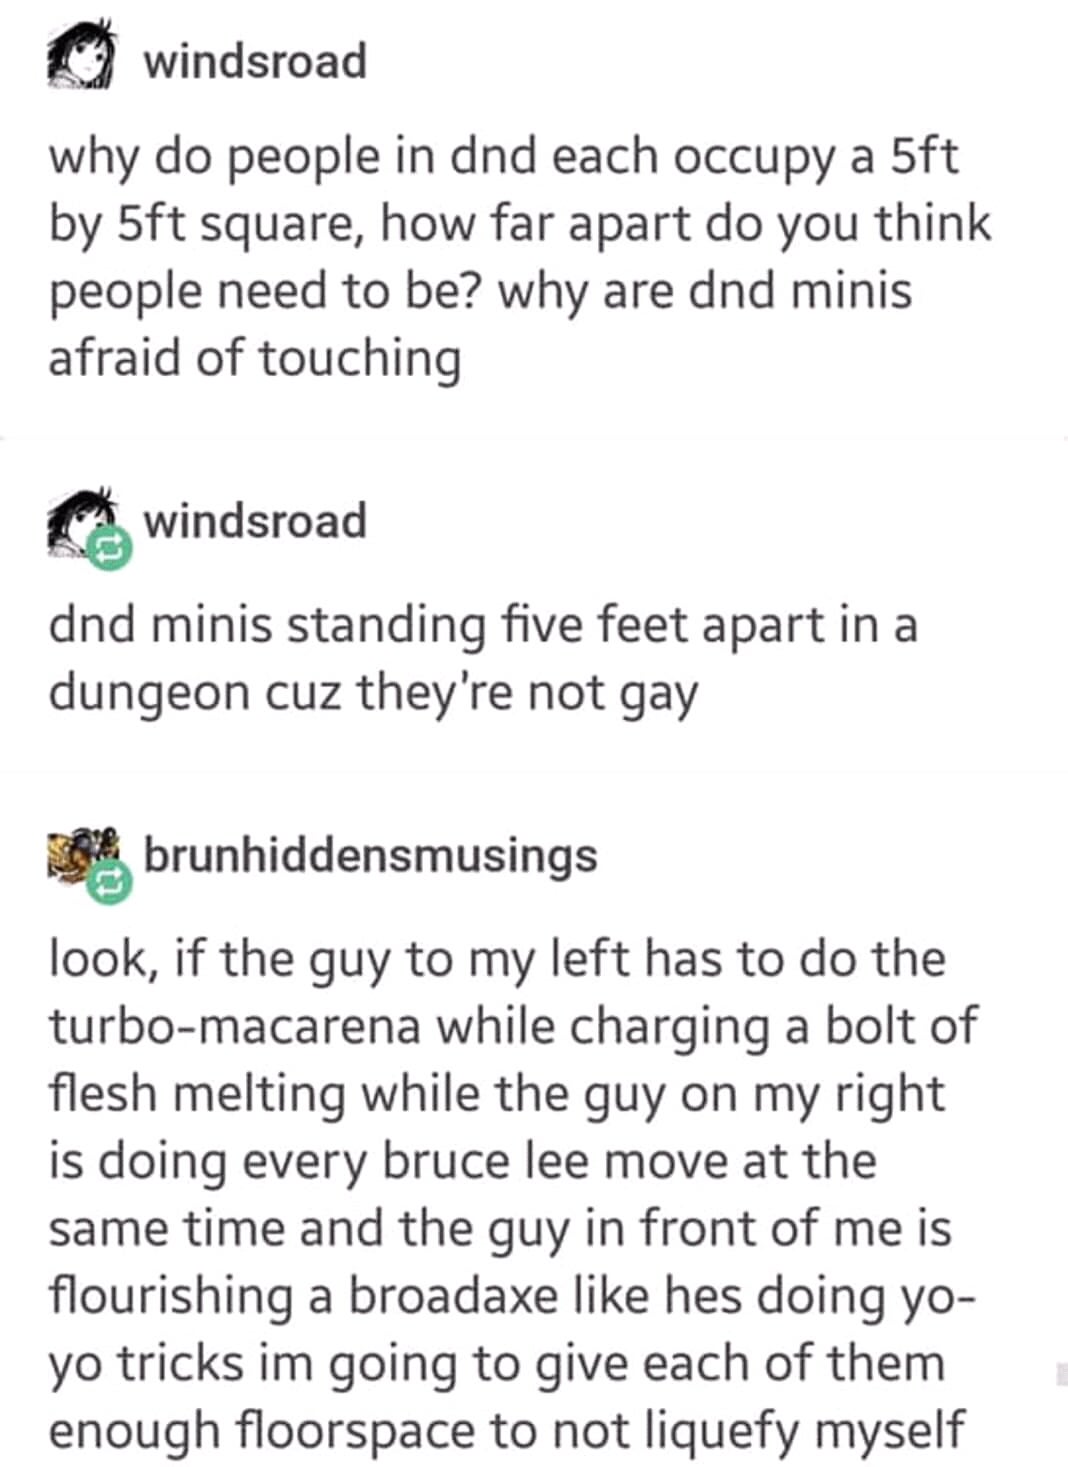 d&d memes - windsroad why do people in dnd each occupy a 5ft by 5ft square, how far apart do you think people need to be? why are dnd minis afraid of touching windsroad dnd minis standing five feet apart in a dungeon cuz they're not gay brunhiddensmusings